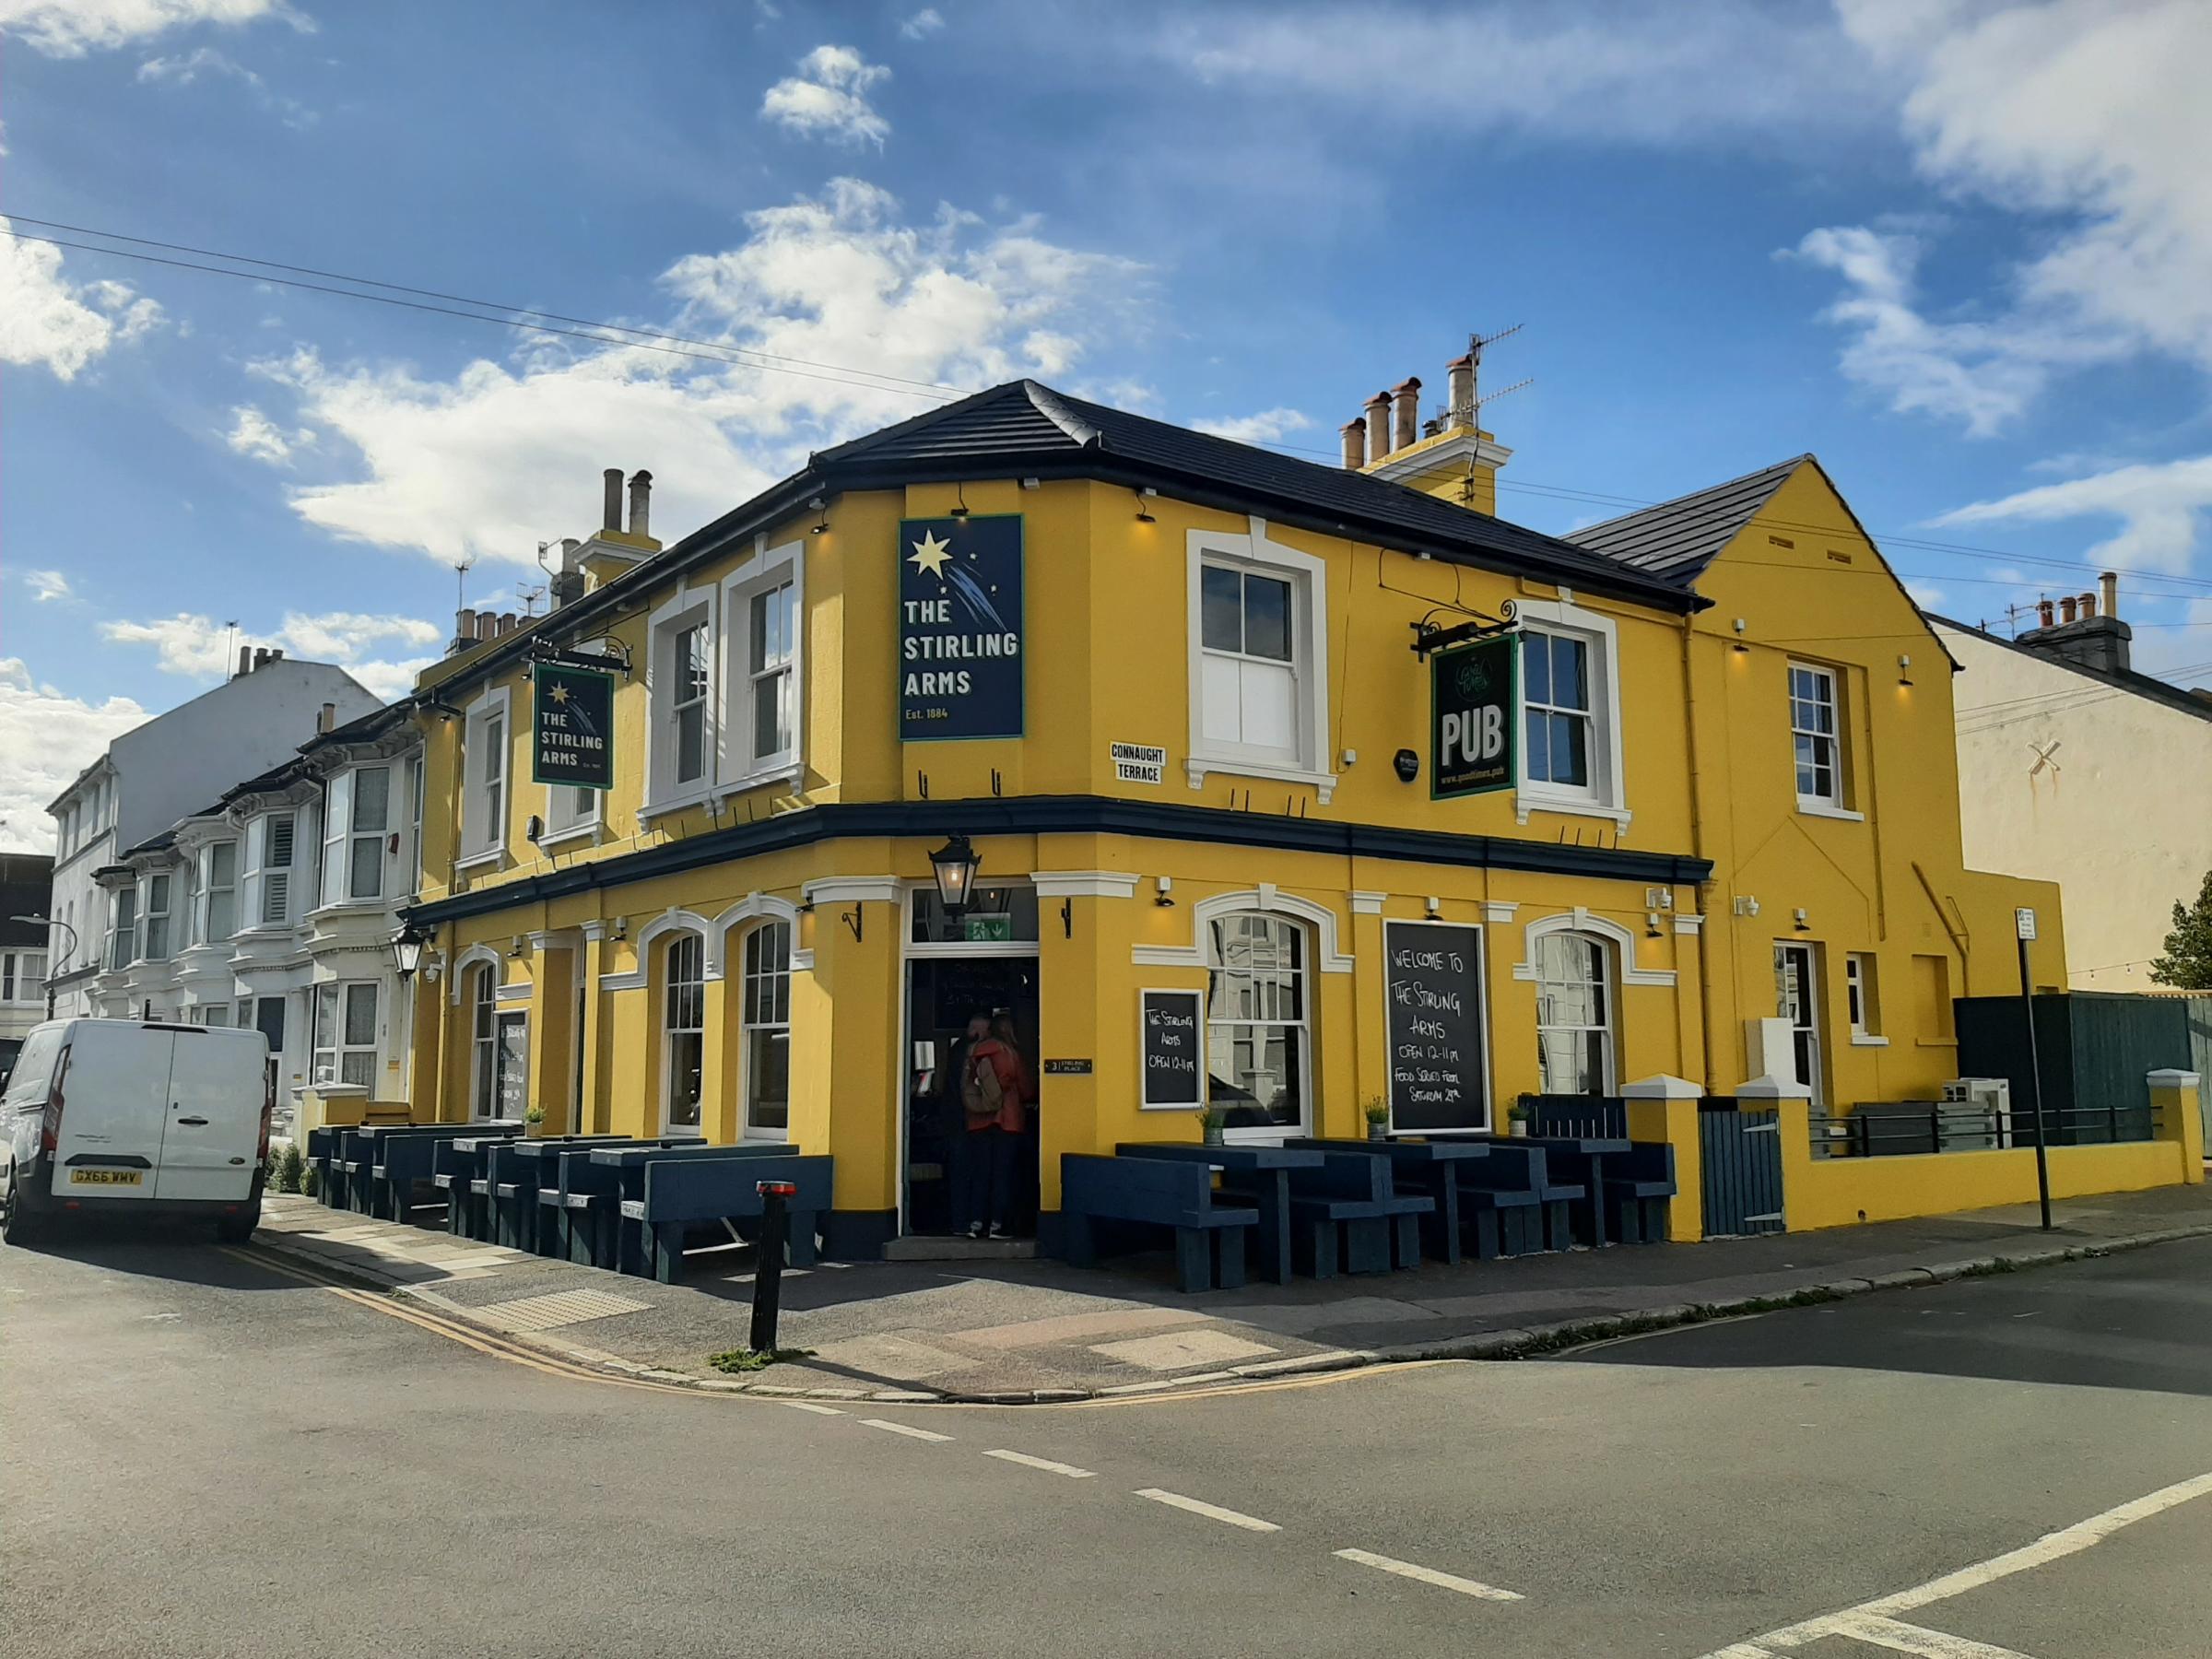 The Stirling Arms has opened in Hove, following a rebranding and new redecoration from the old Foragers pub in Stirling Place, Hove